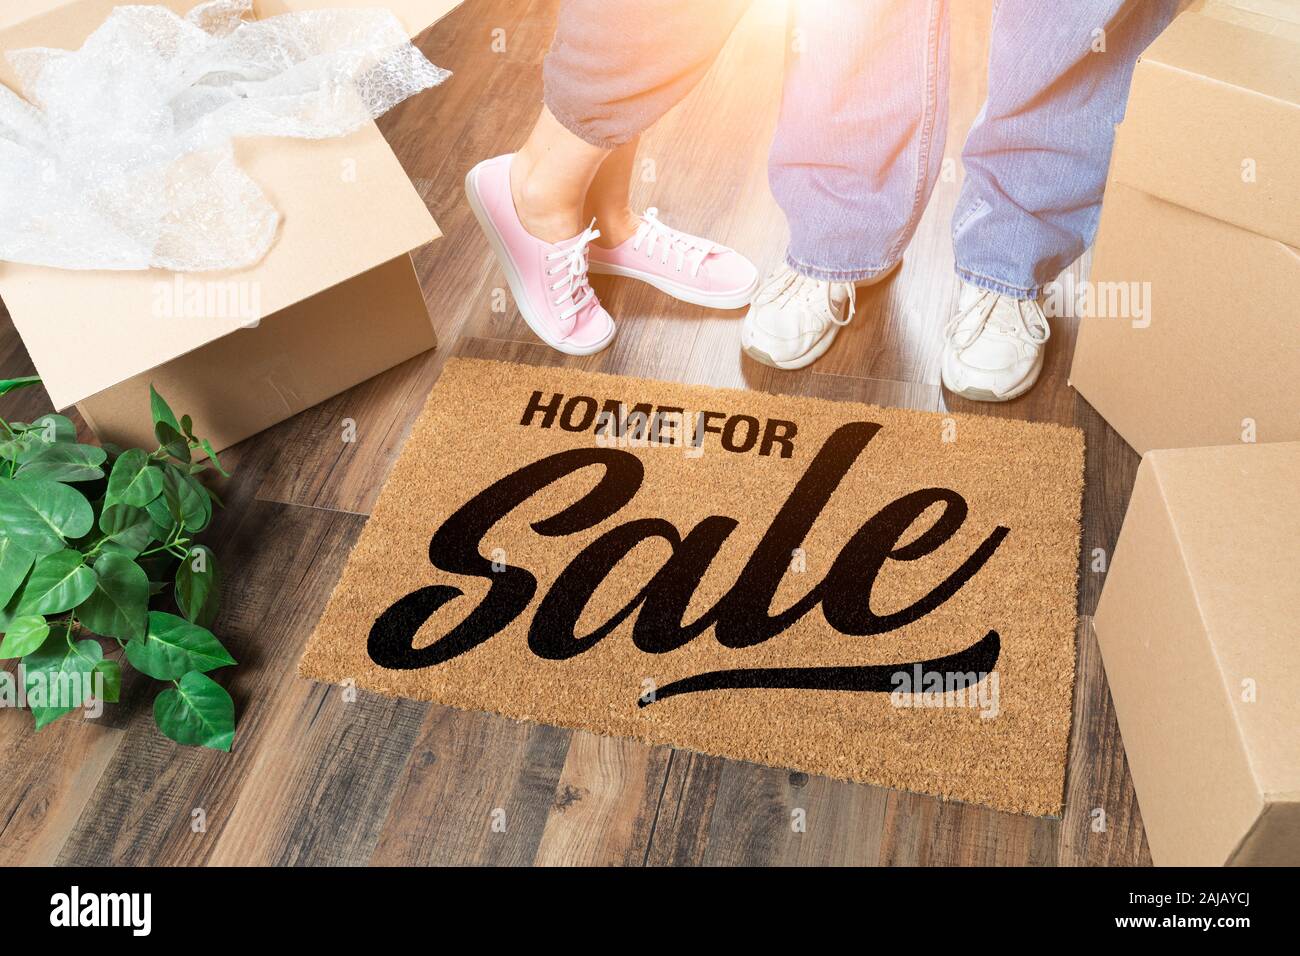 Man and Woman Standing Near Home For Sale Welcome Mat, Moving Boxes and Plant. Stock Photo